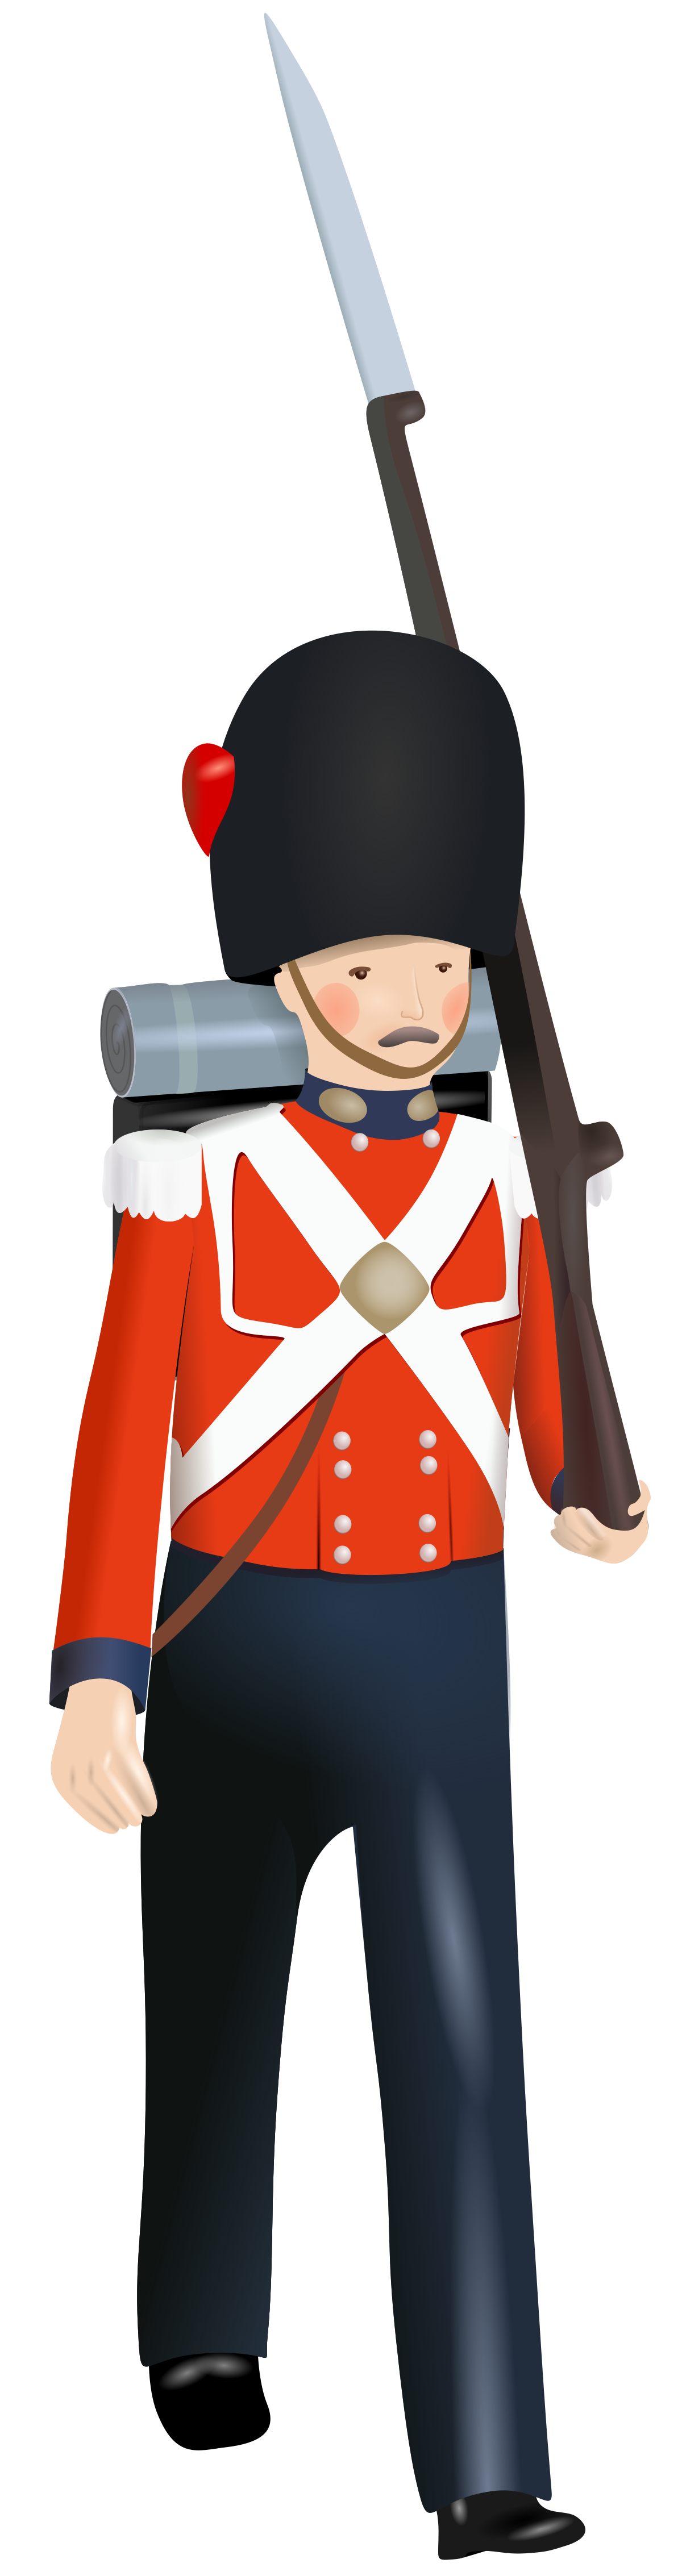 Download File Toy Soldier Svg Wikimedia Commons